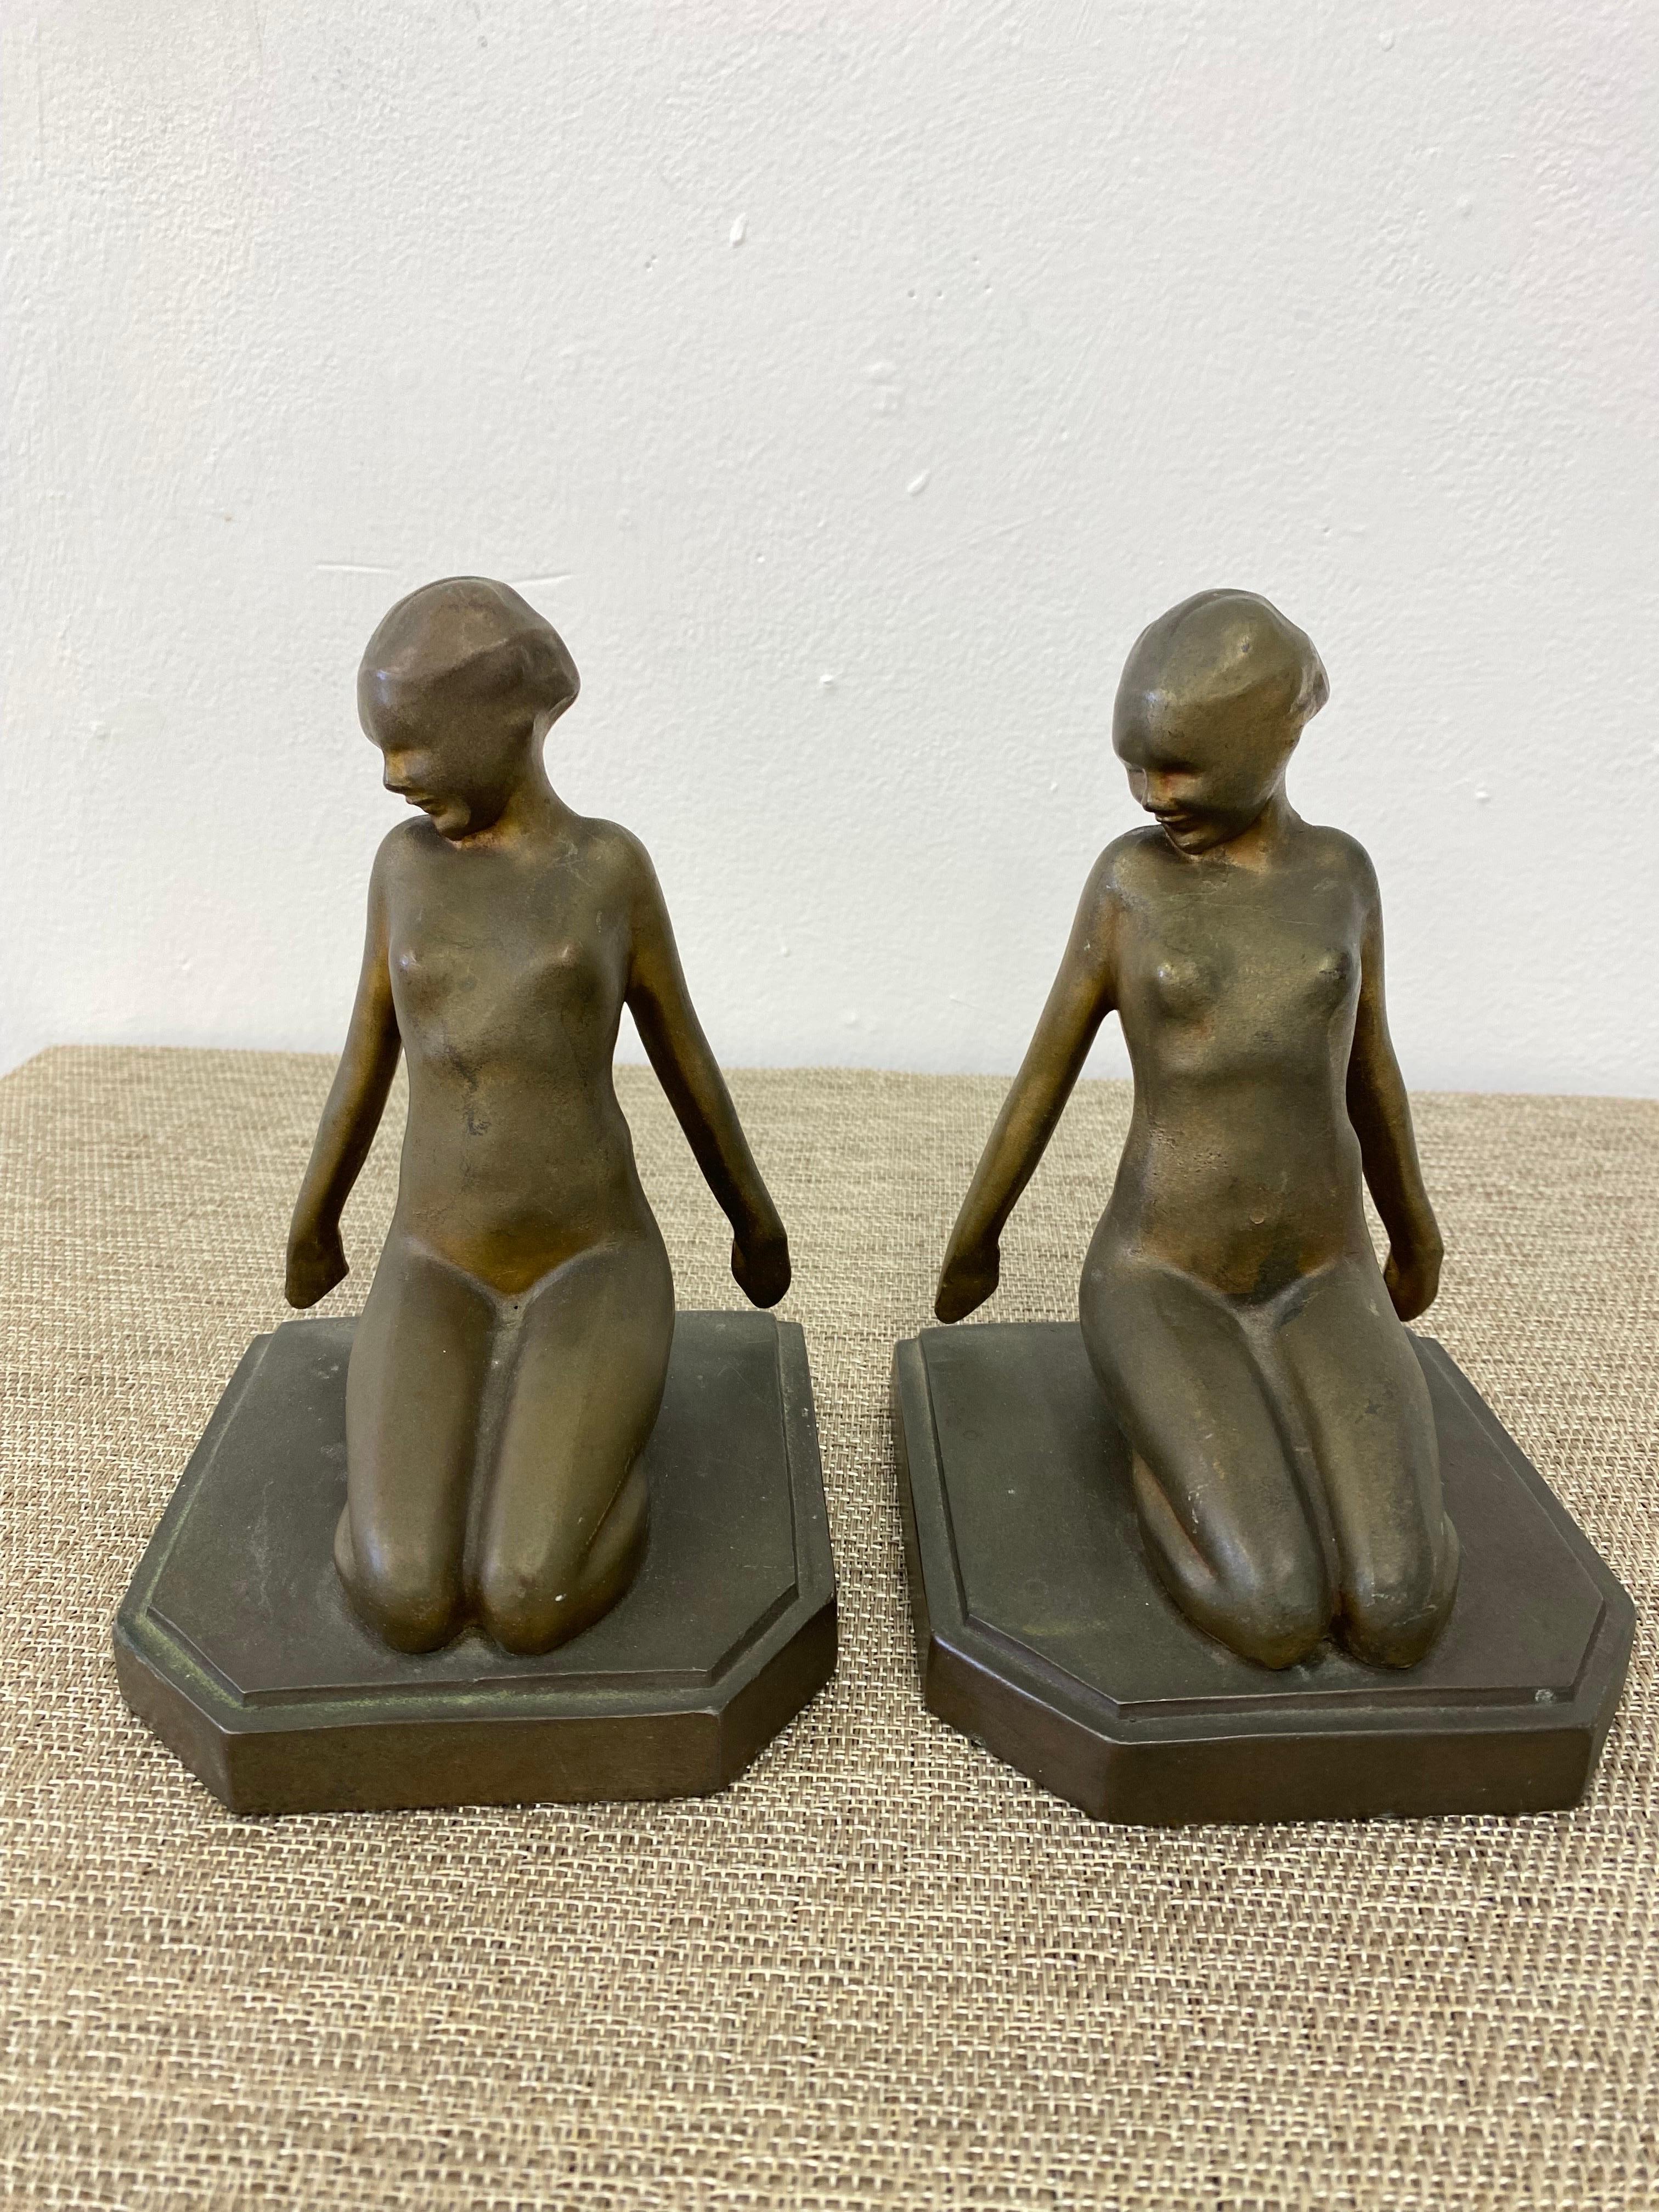 Frankart Kneeling Ladies Bookends Model B412 in nice original condition.  Nice Patina, worn finish.  One lady has a crack to backside of head as seen in photo.